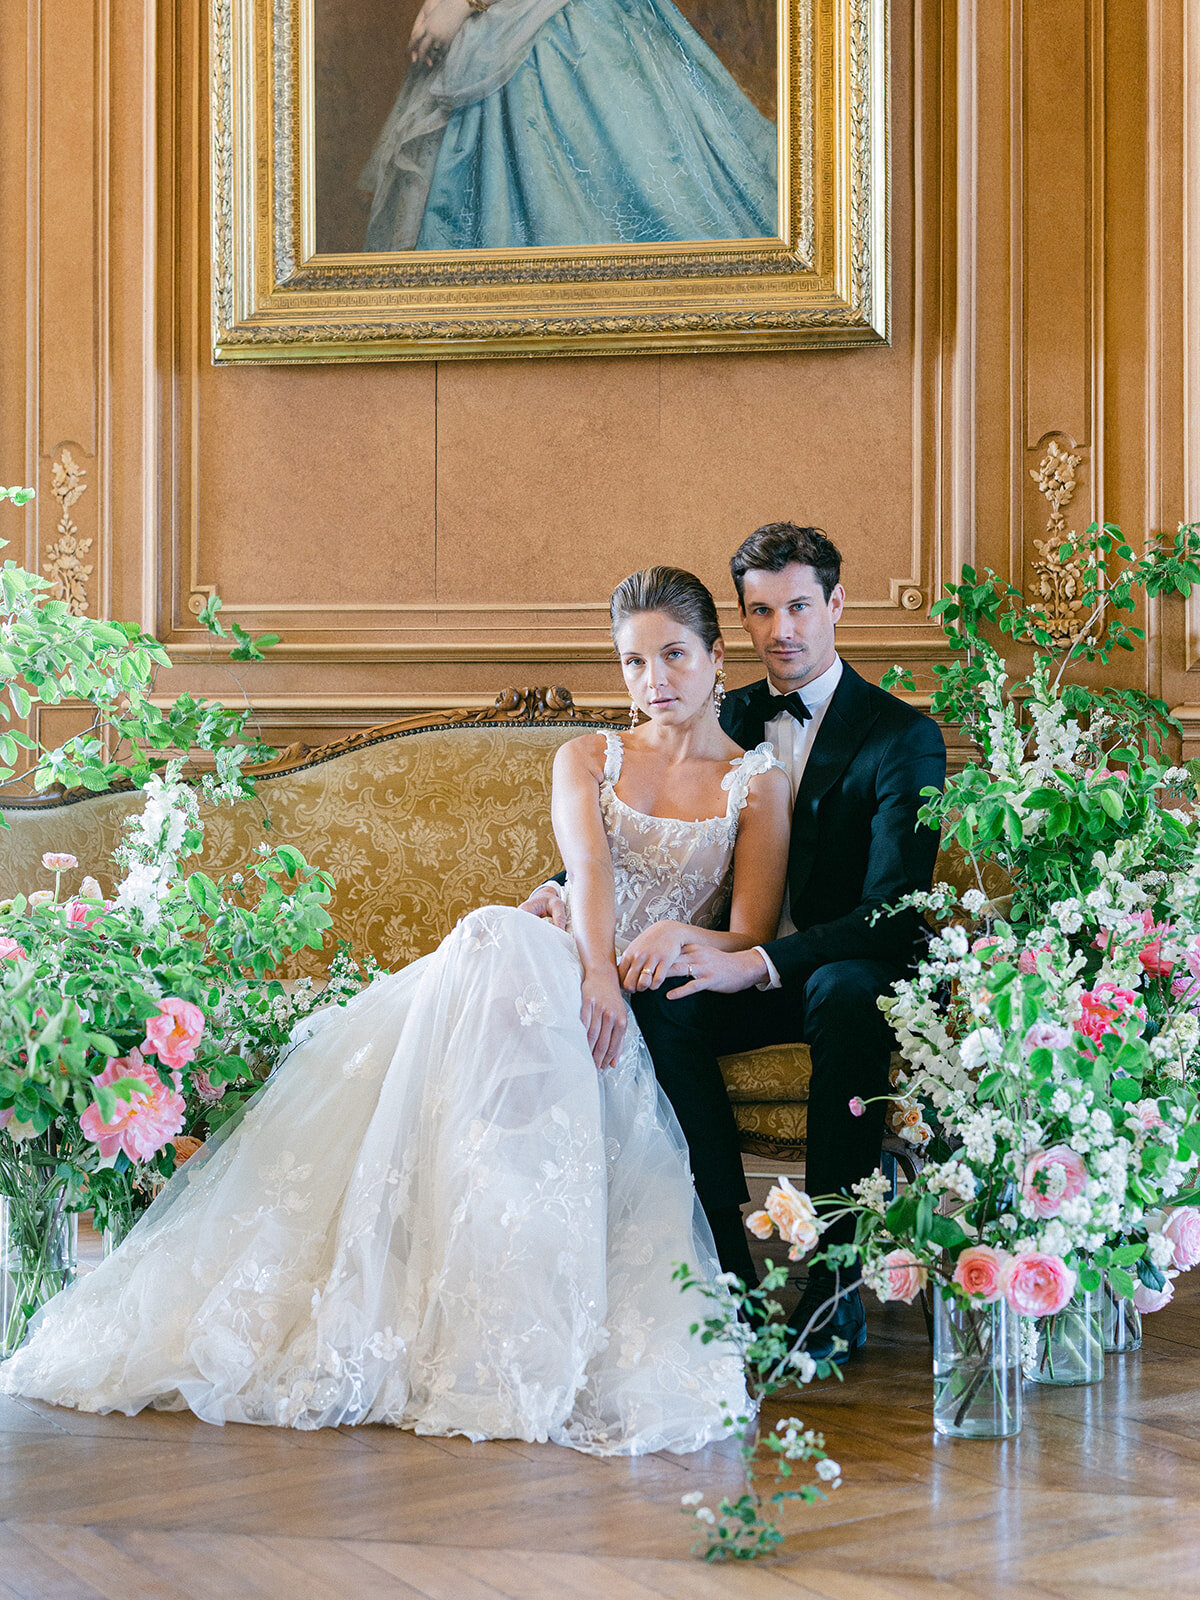 bride and groom on a sofa surrounded by flowers